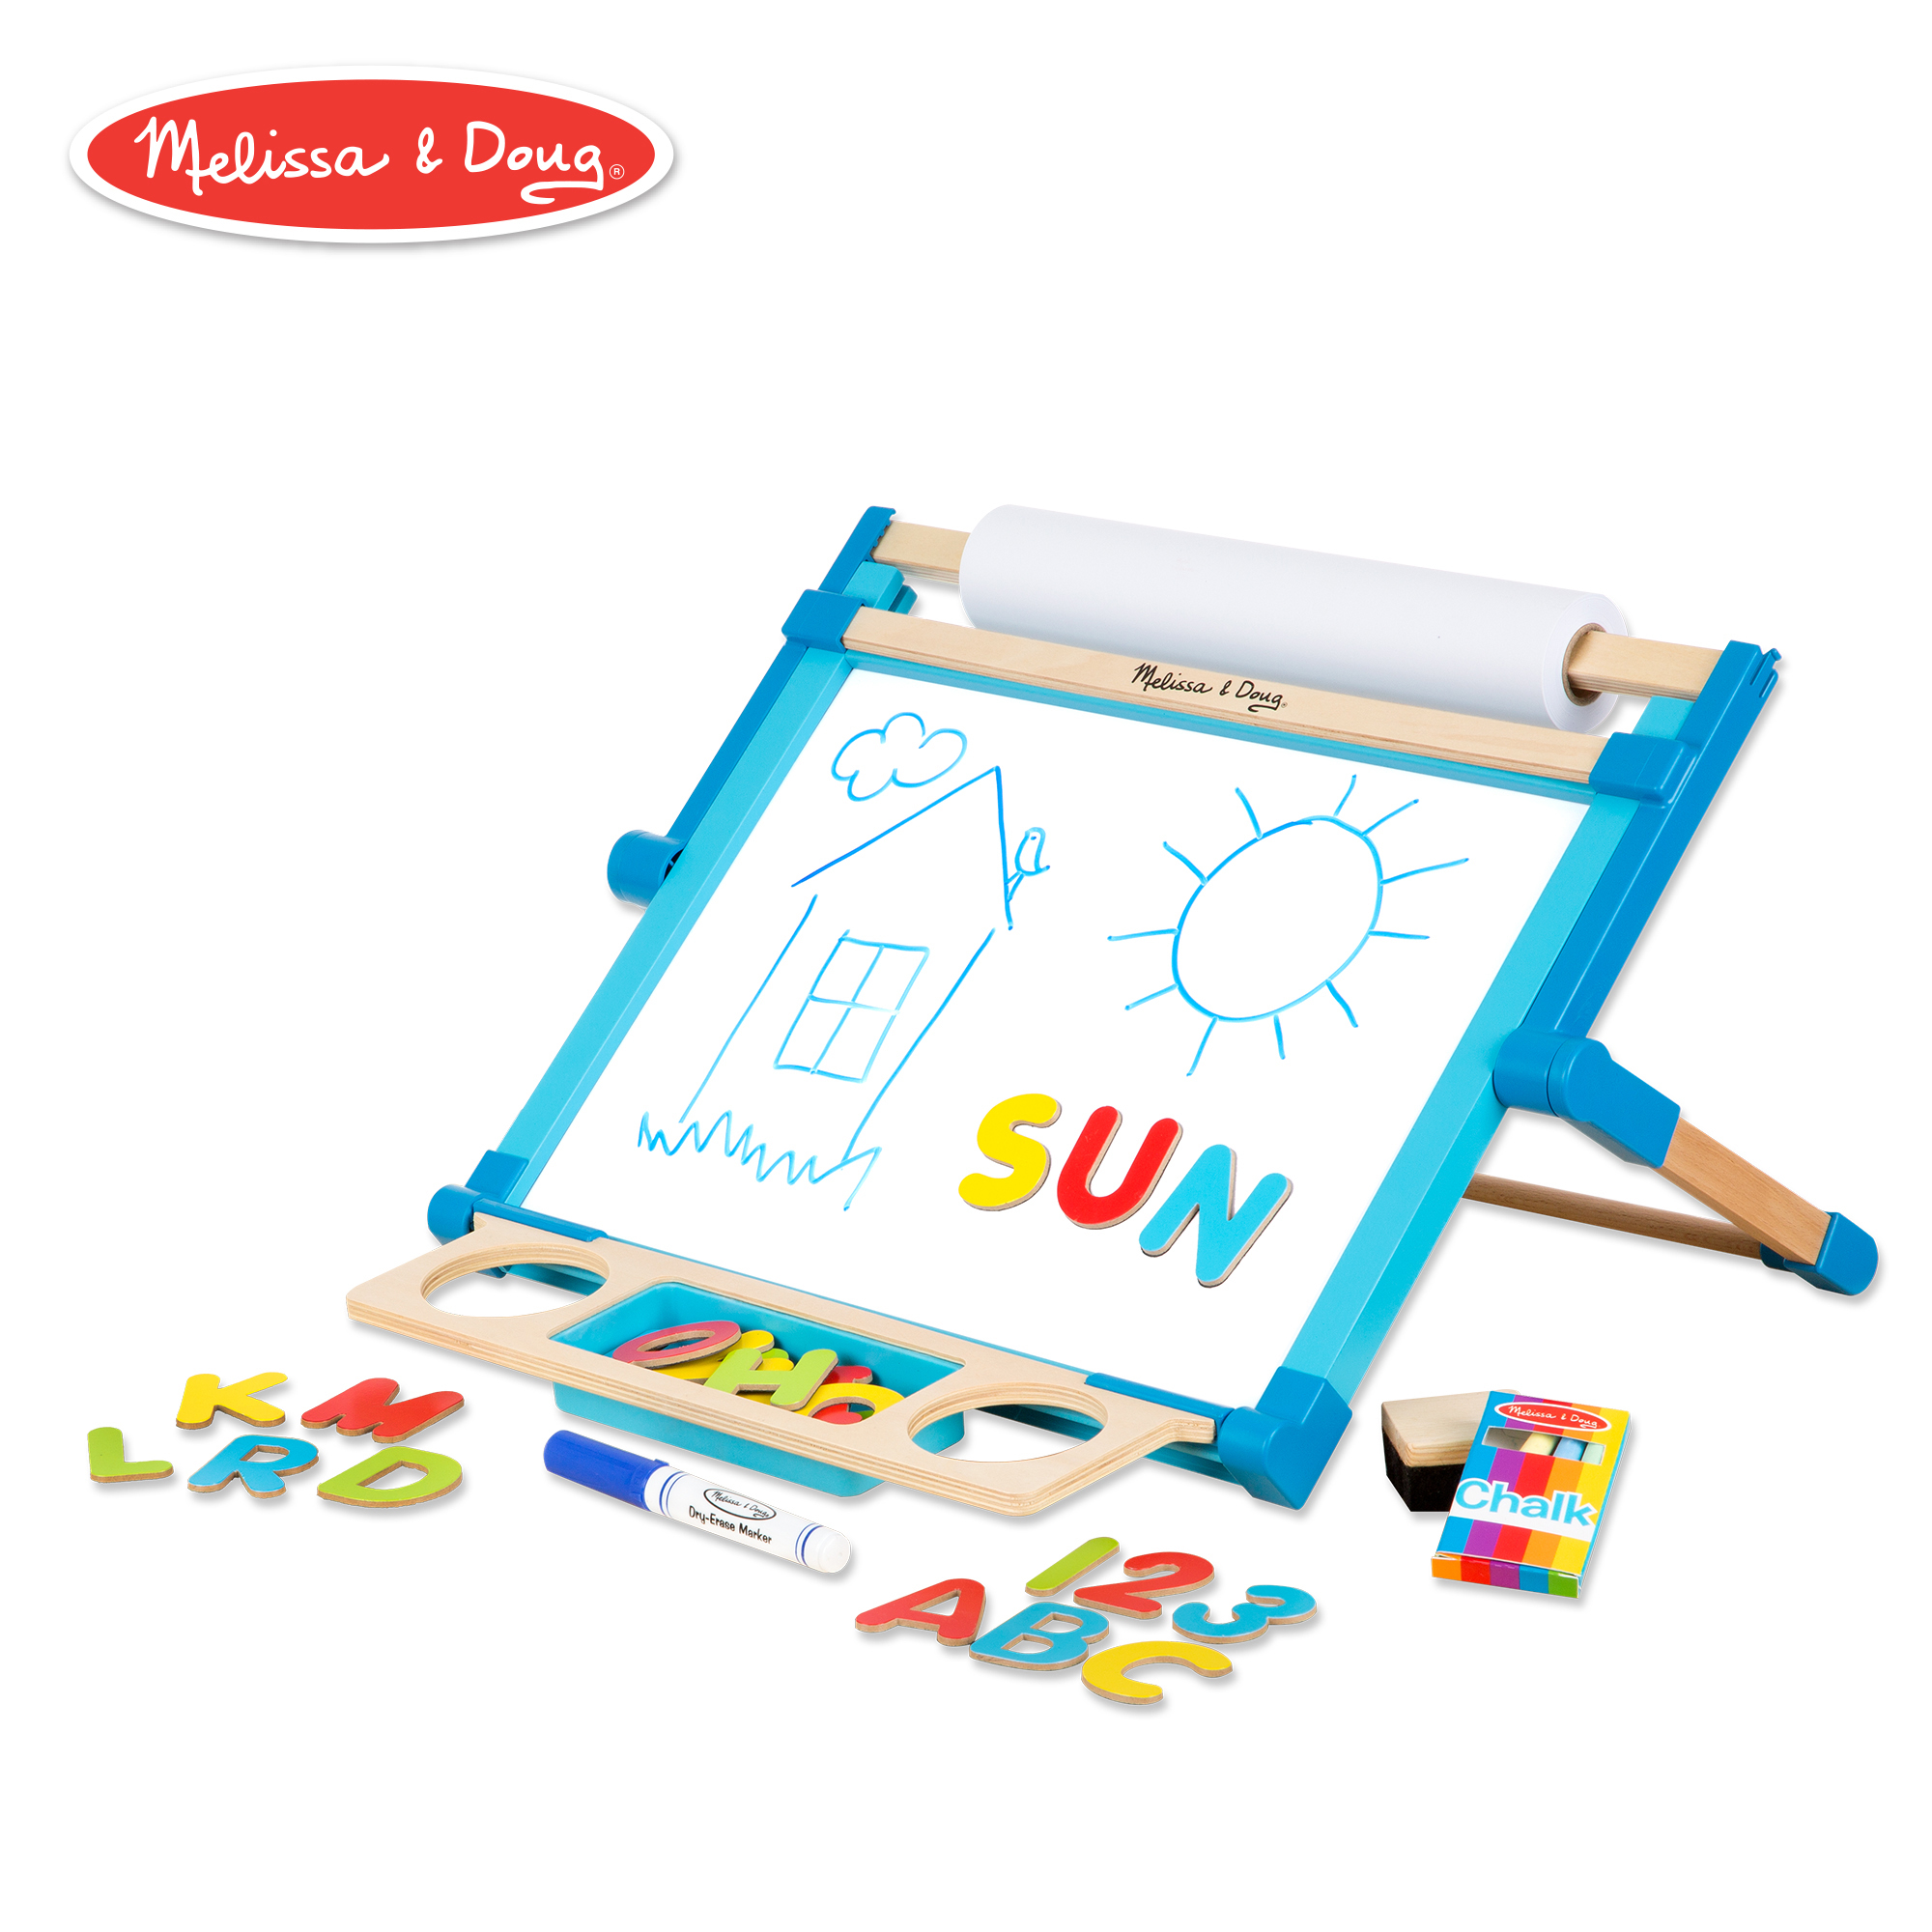 Double-sided Magnetic Tabletop Art Easel - Dry-erase Board And Chalkboard